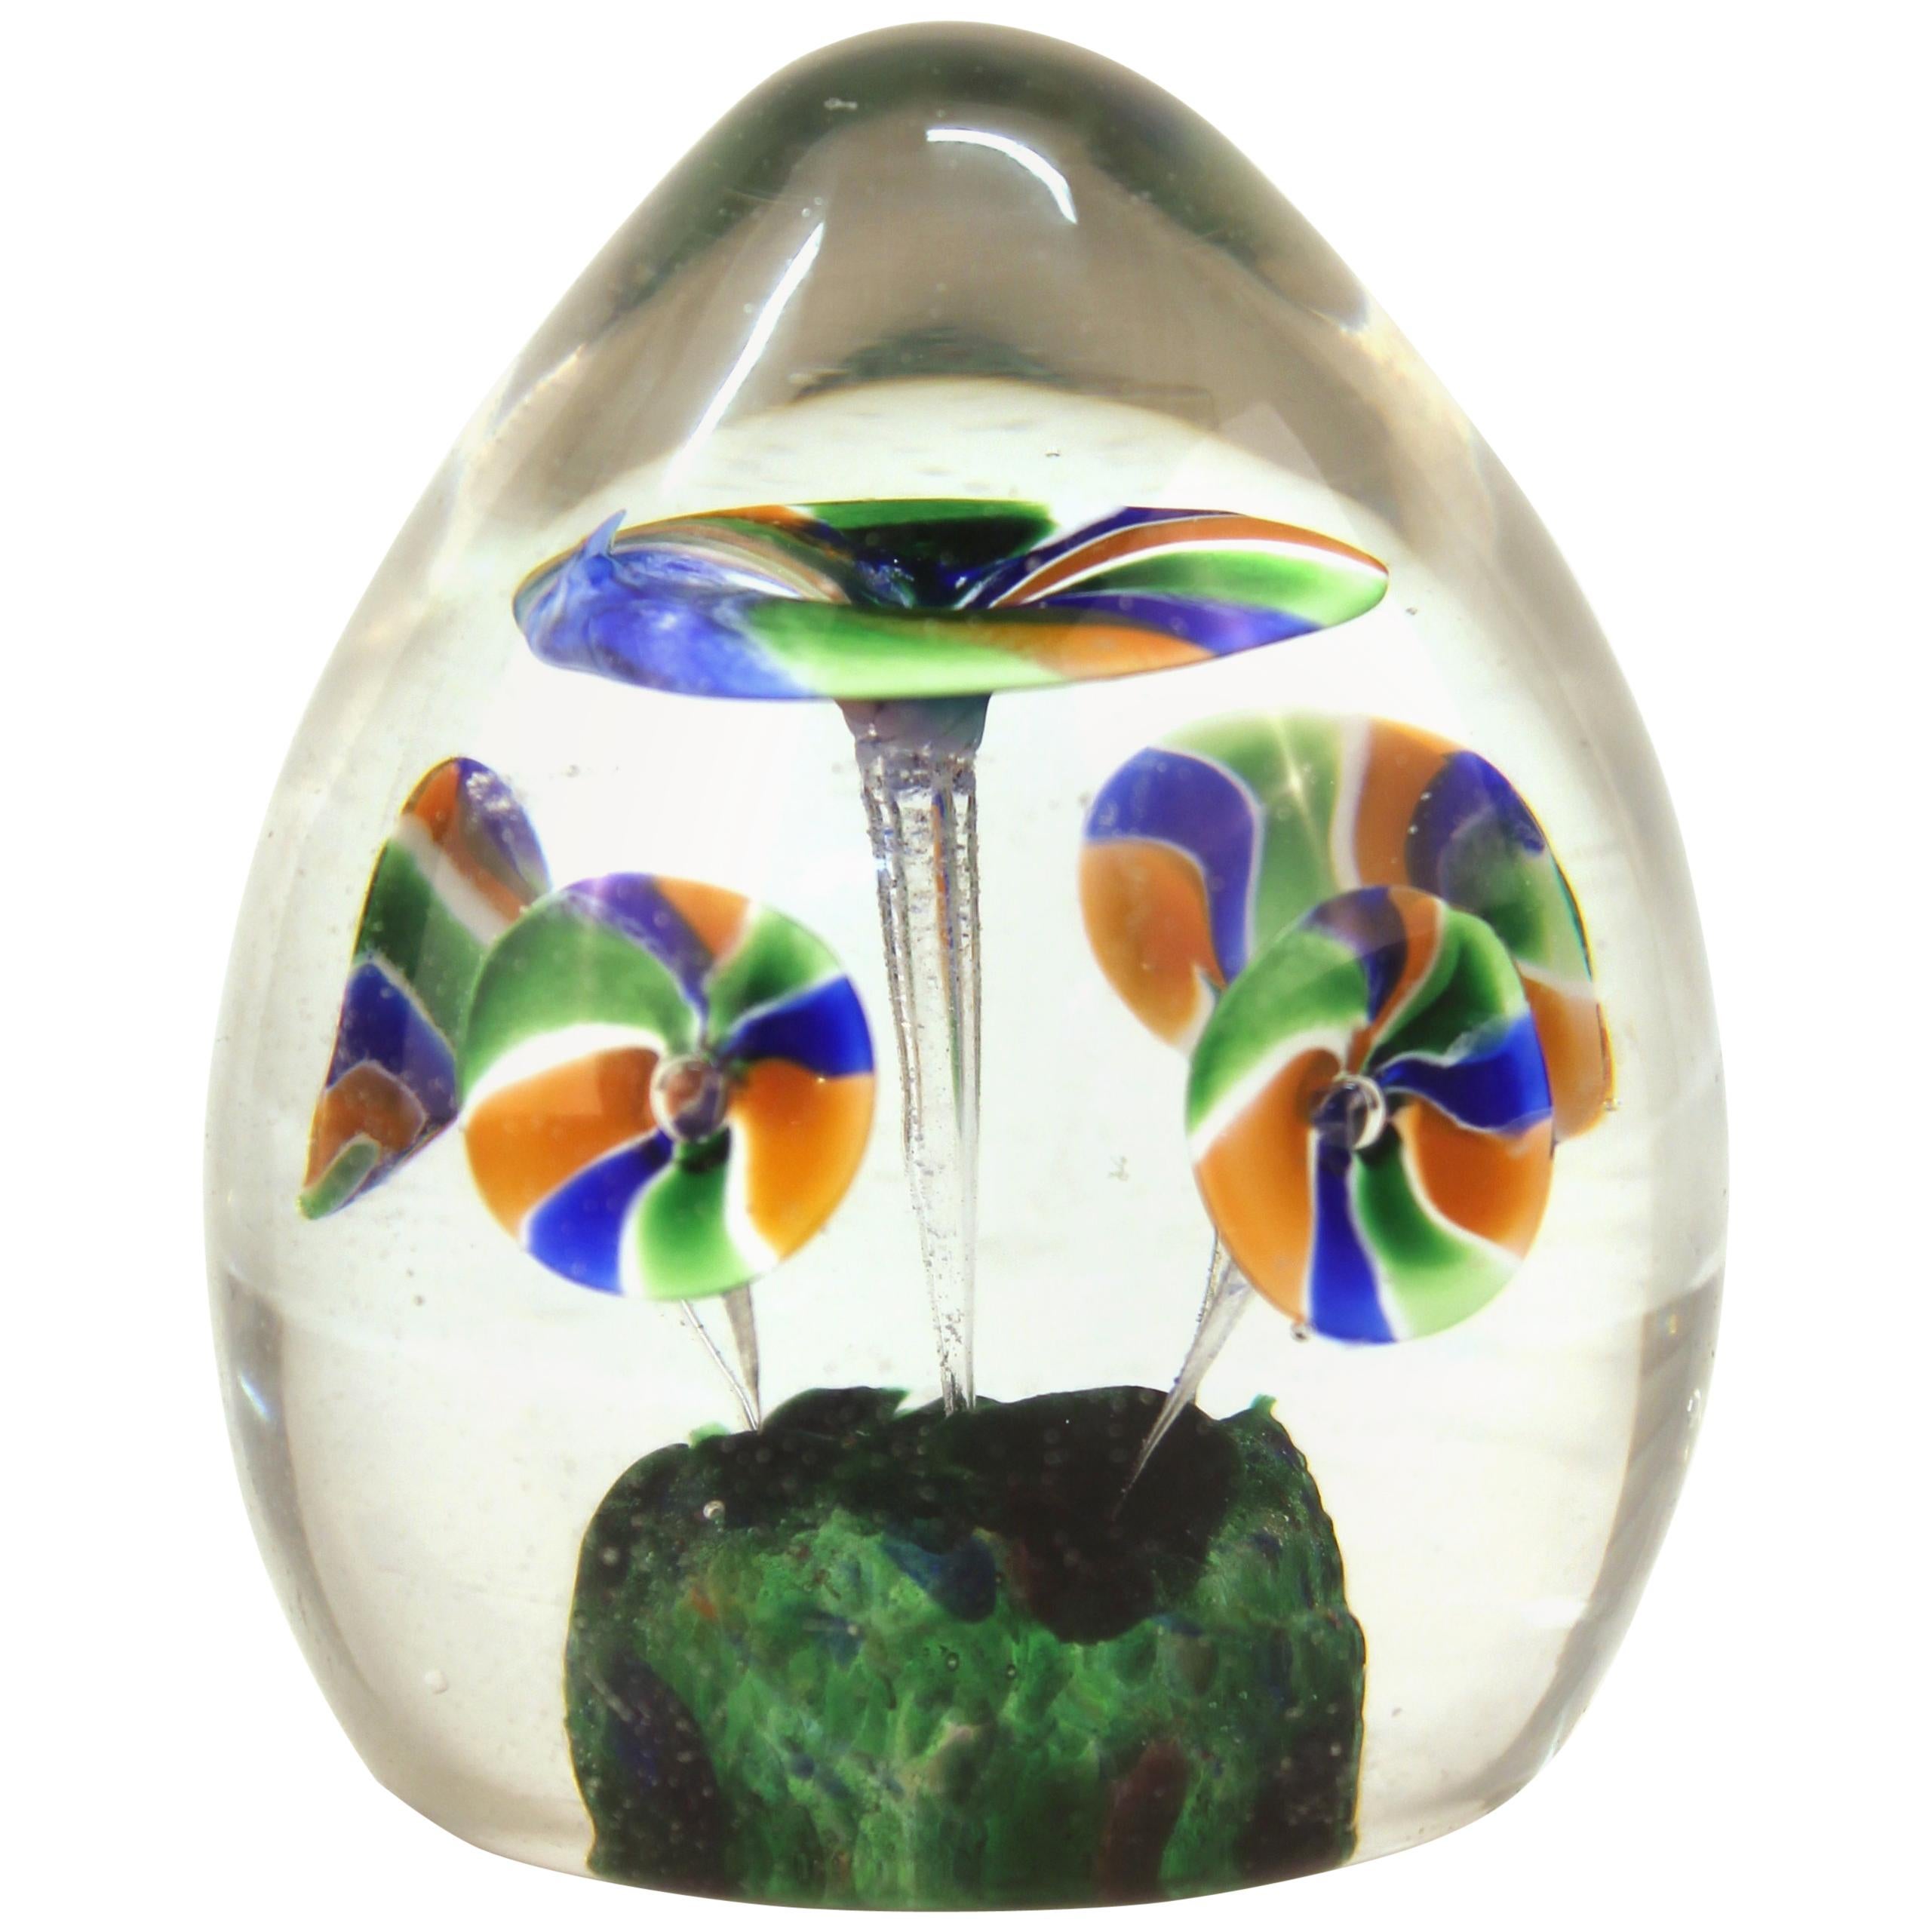 Italian Midcentury Murano Art Glass Paperweight with Floral Motif For Sale